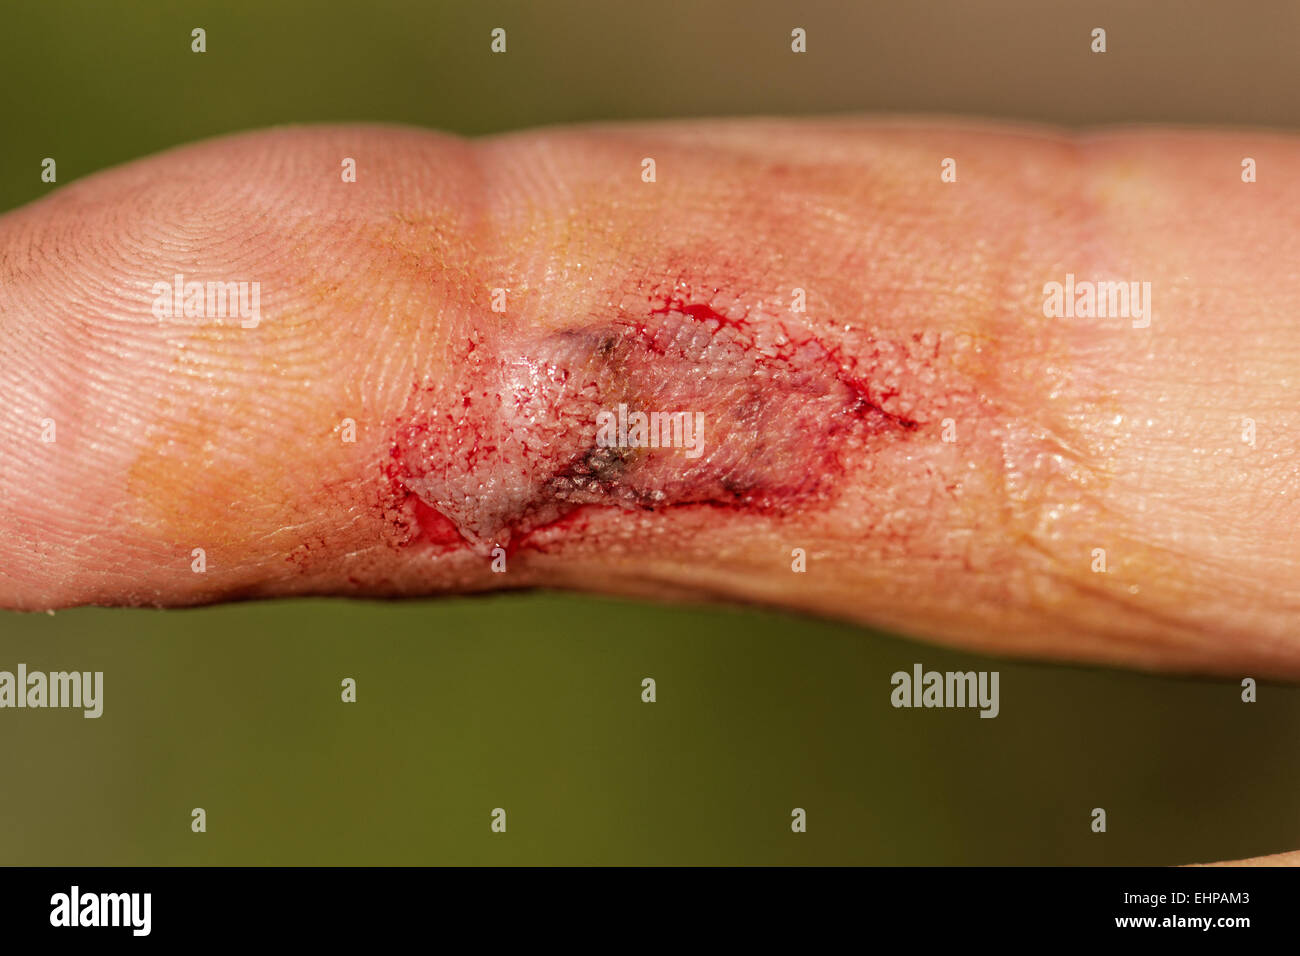 Flesh wound with blood on male finger Stock Photo